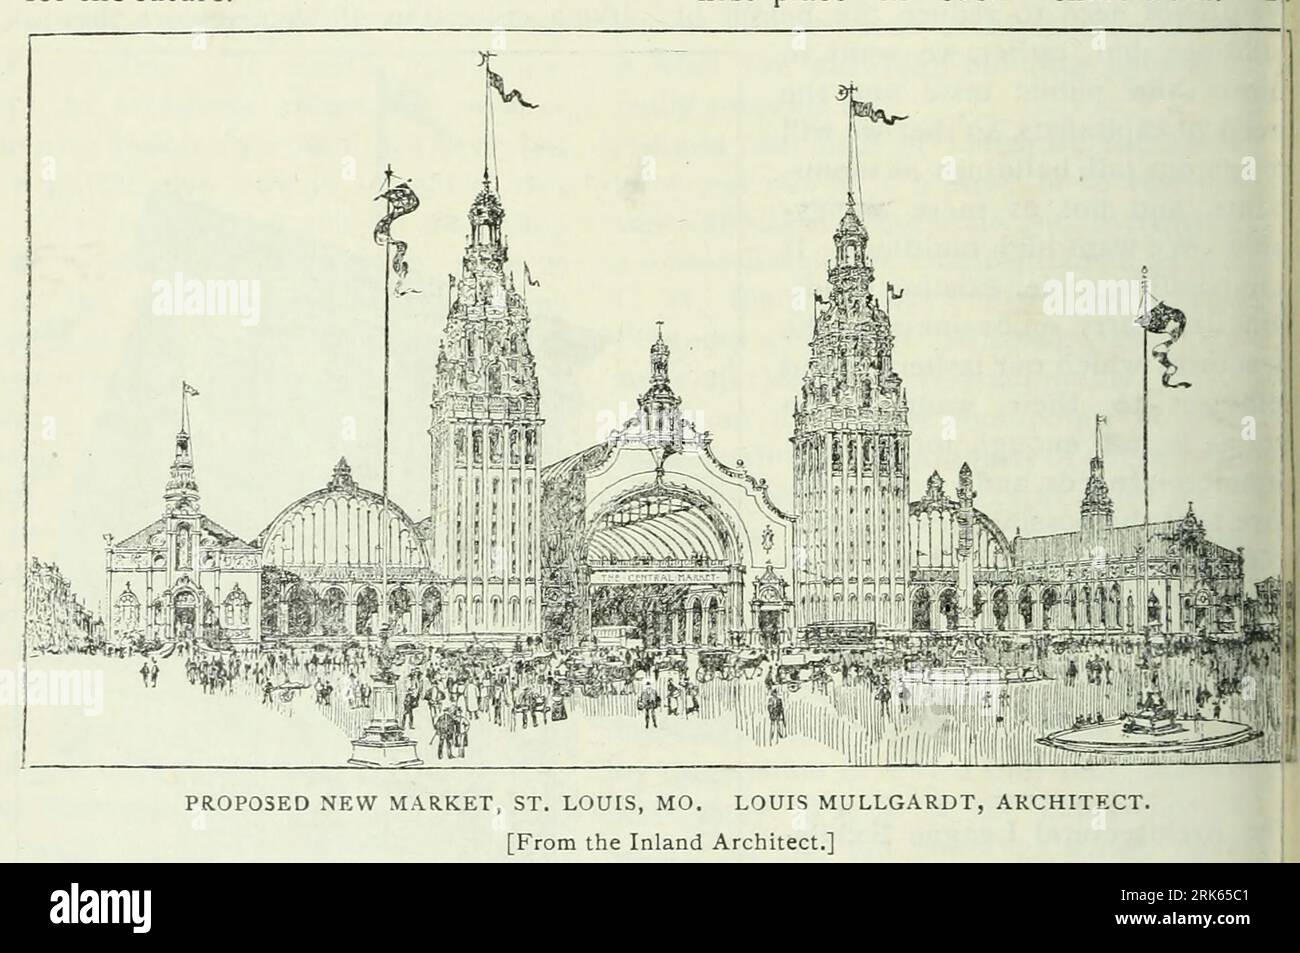 PROPOSED NEW MARKET, ST. LOUIS, MO. LOUIS MULLGARDT, ARCHITECT. from the Article Architectural Review from The Engineering Magazine DEVOTED TO INDUSTRIAL PROGRESS Volume XI October 1896 NEW YORK The Engineering Magazine Co Stock Photo